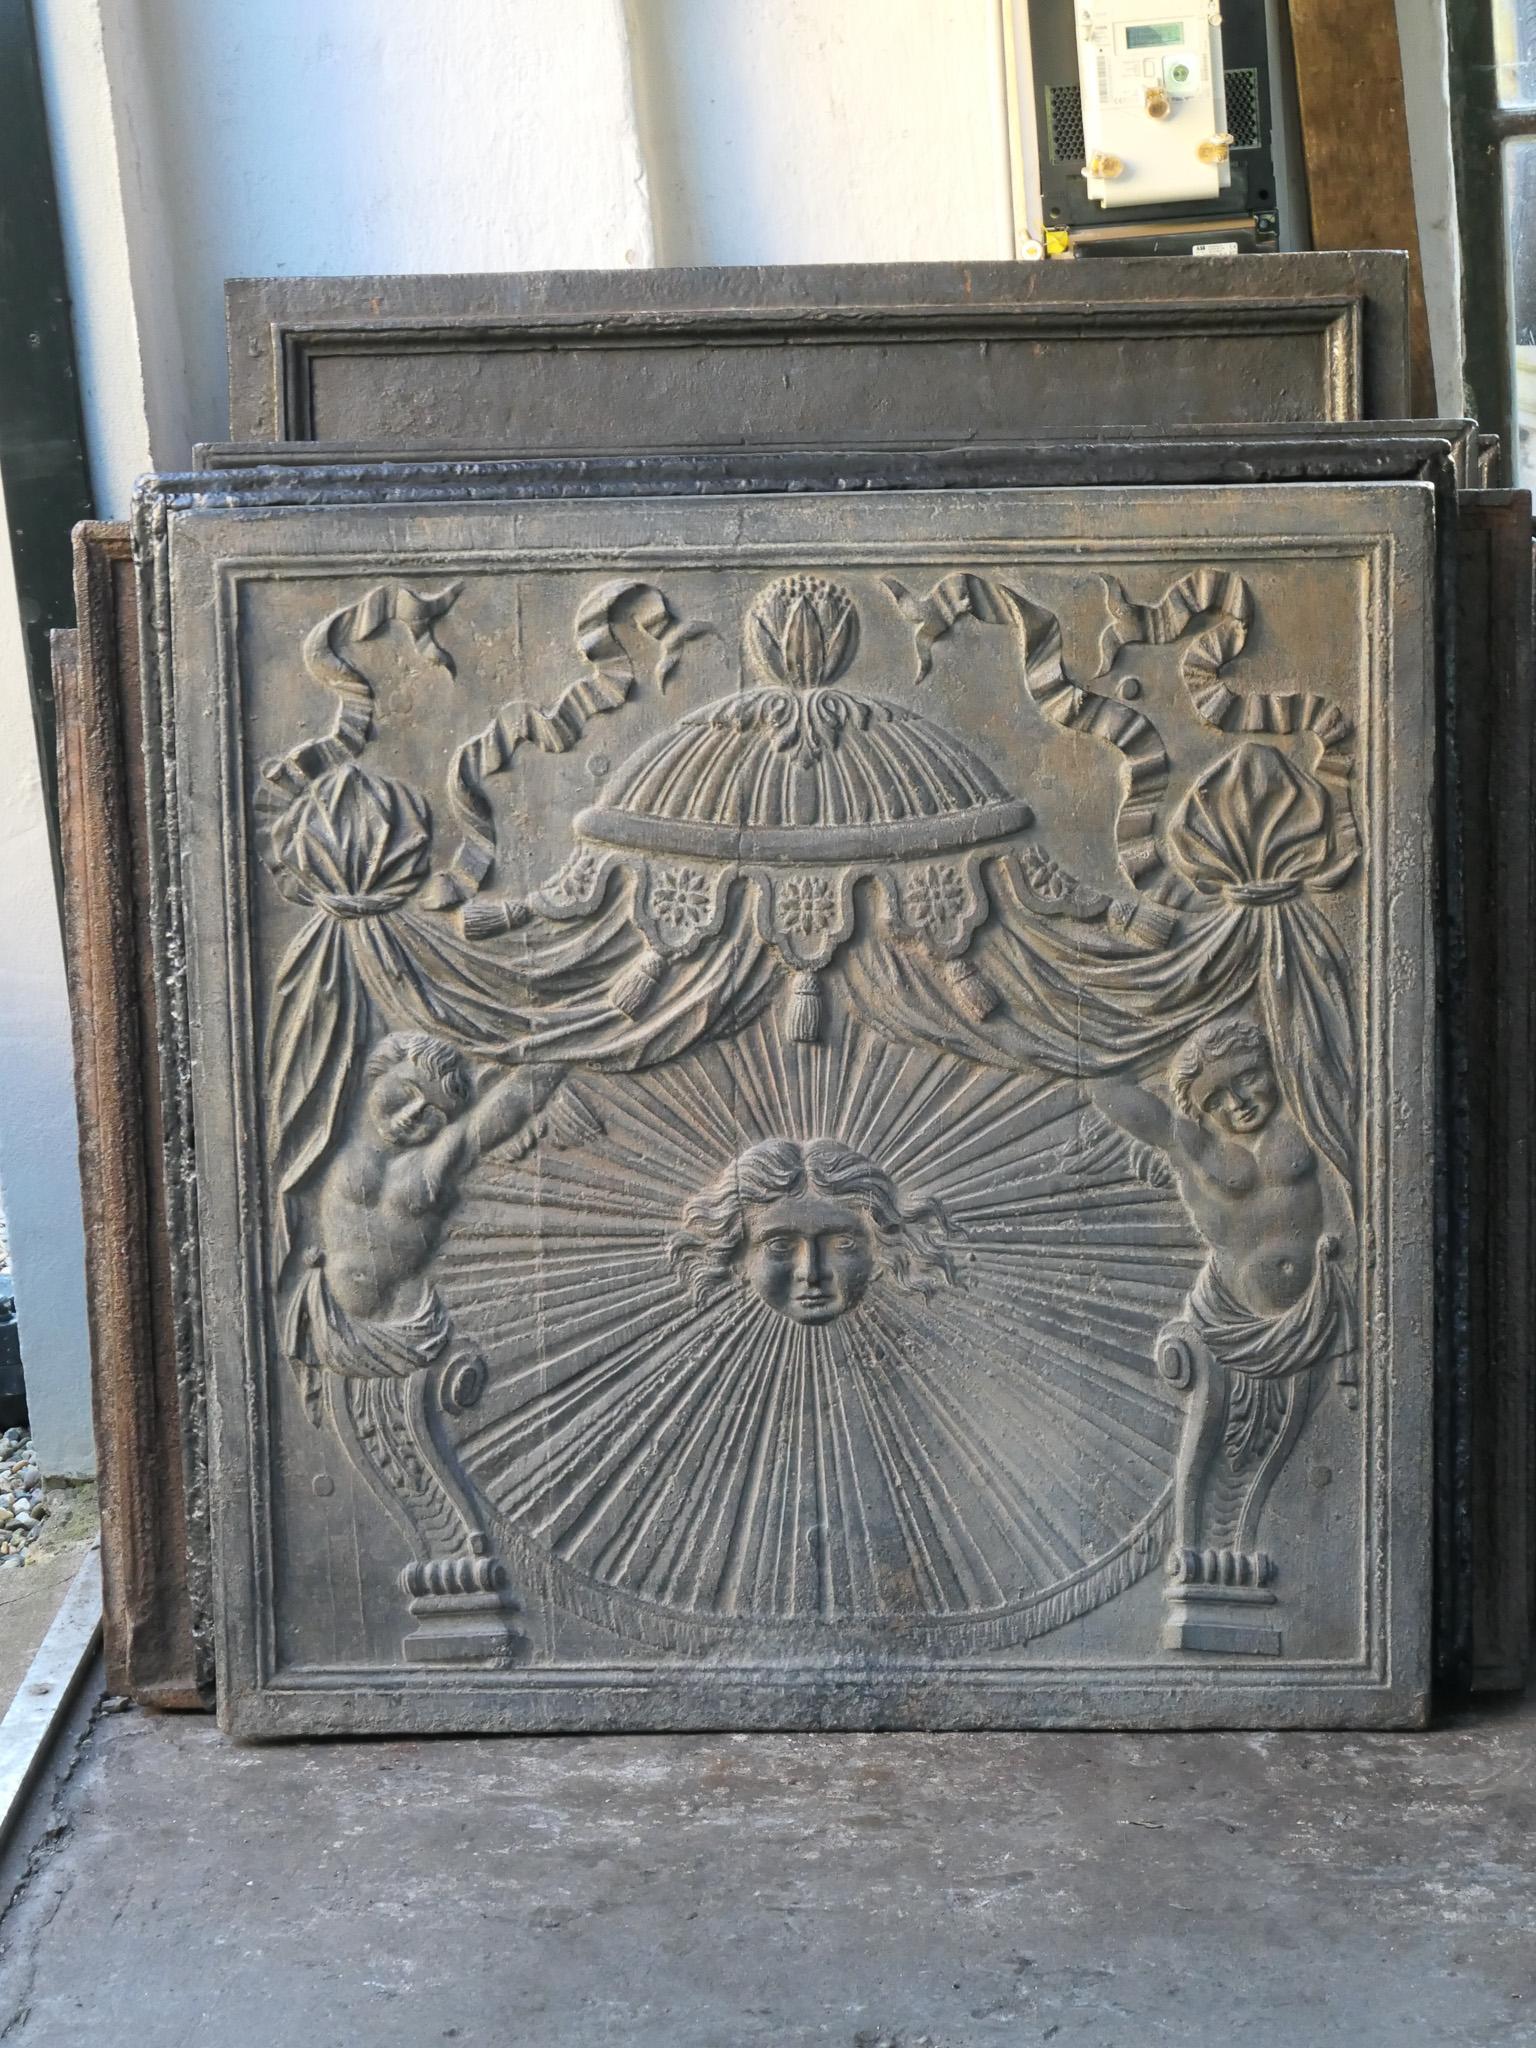 Large 18th - 19th century French neoclassical period fireback with the sun. The sun is symbol voor king Louis XIV.

The fireback is in a good condition and does not have cracks.

This large fireback will be shipped as freight. Please contact us for